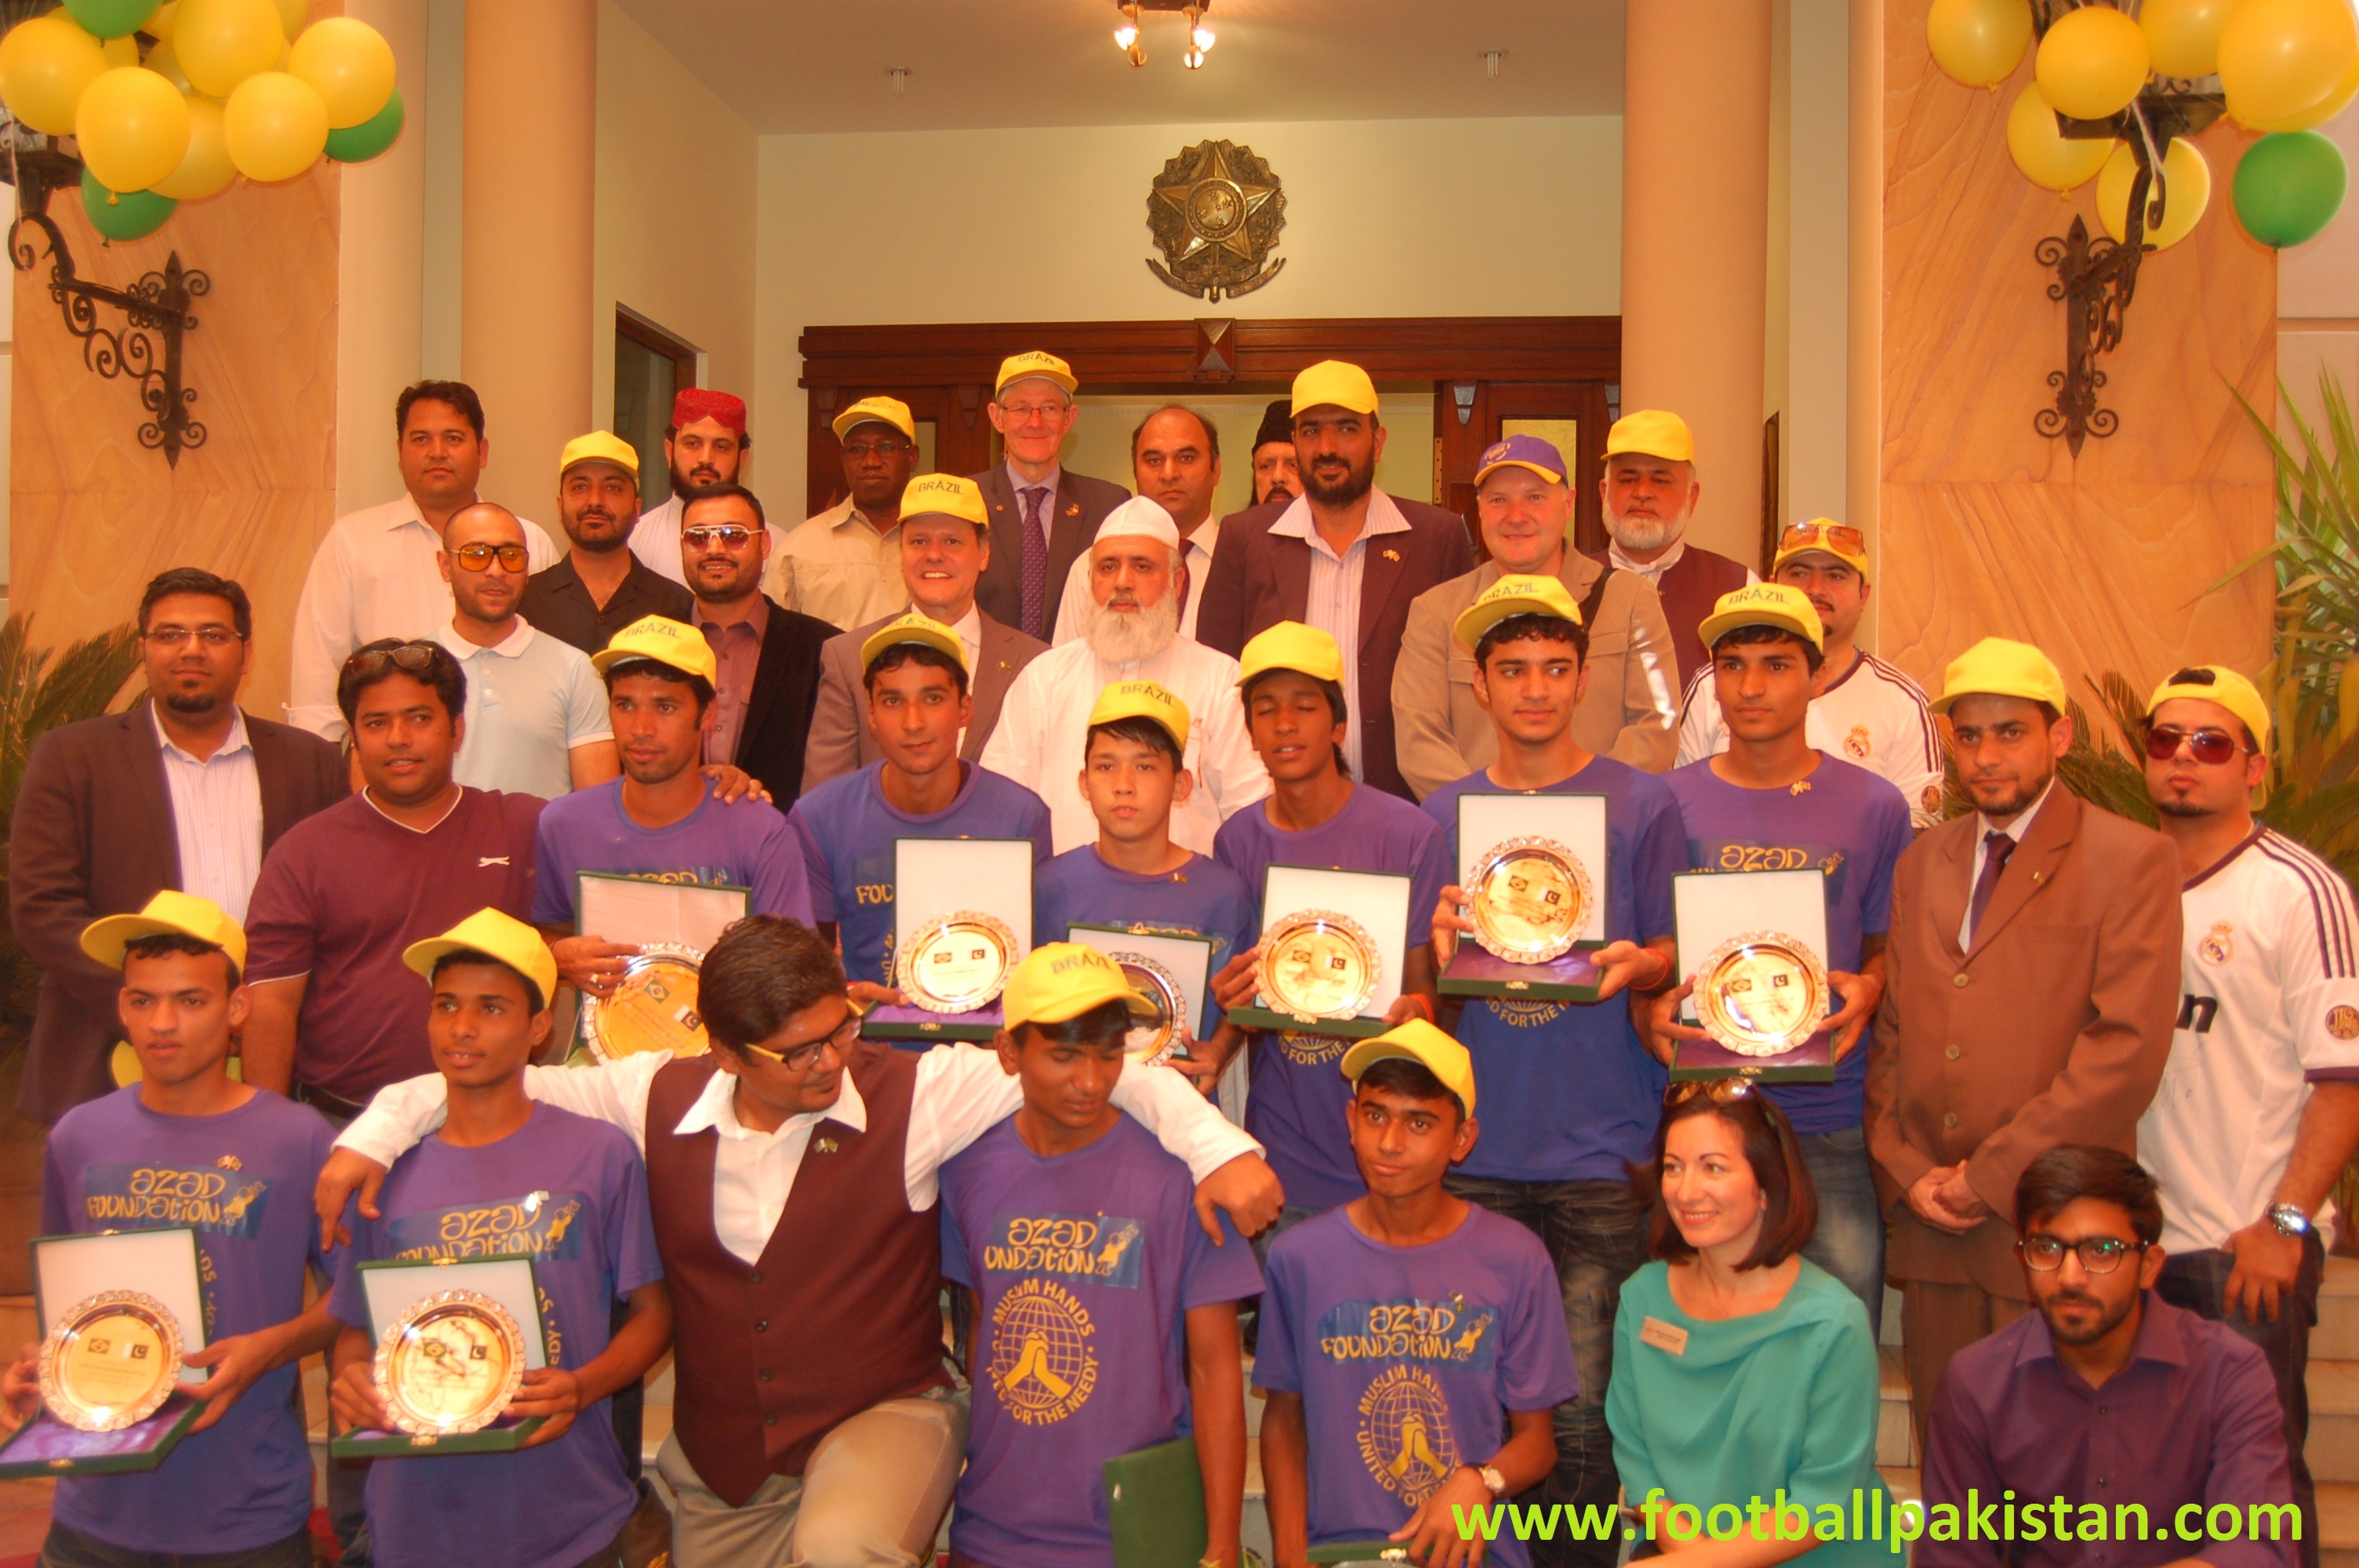 Brazil Embassy hosts special reception for the Street Child World Cup Team